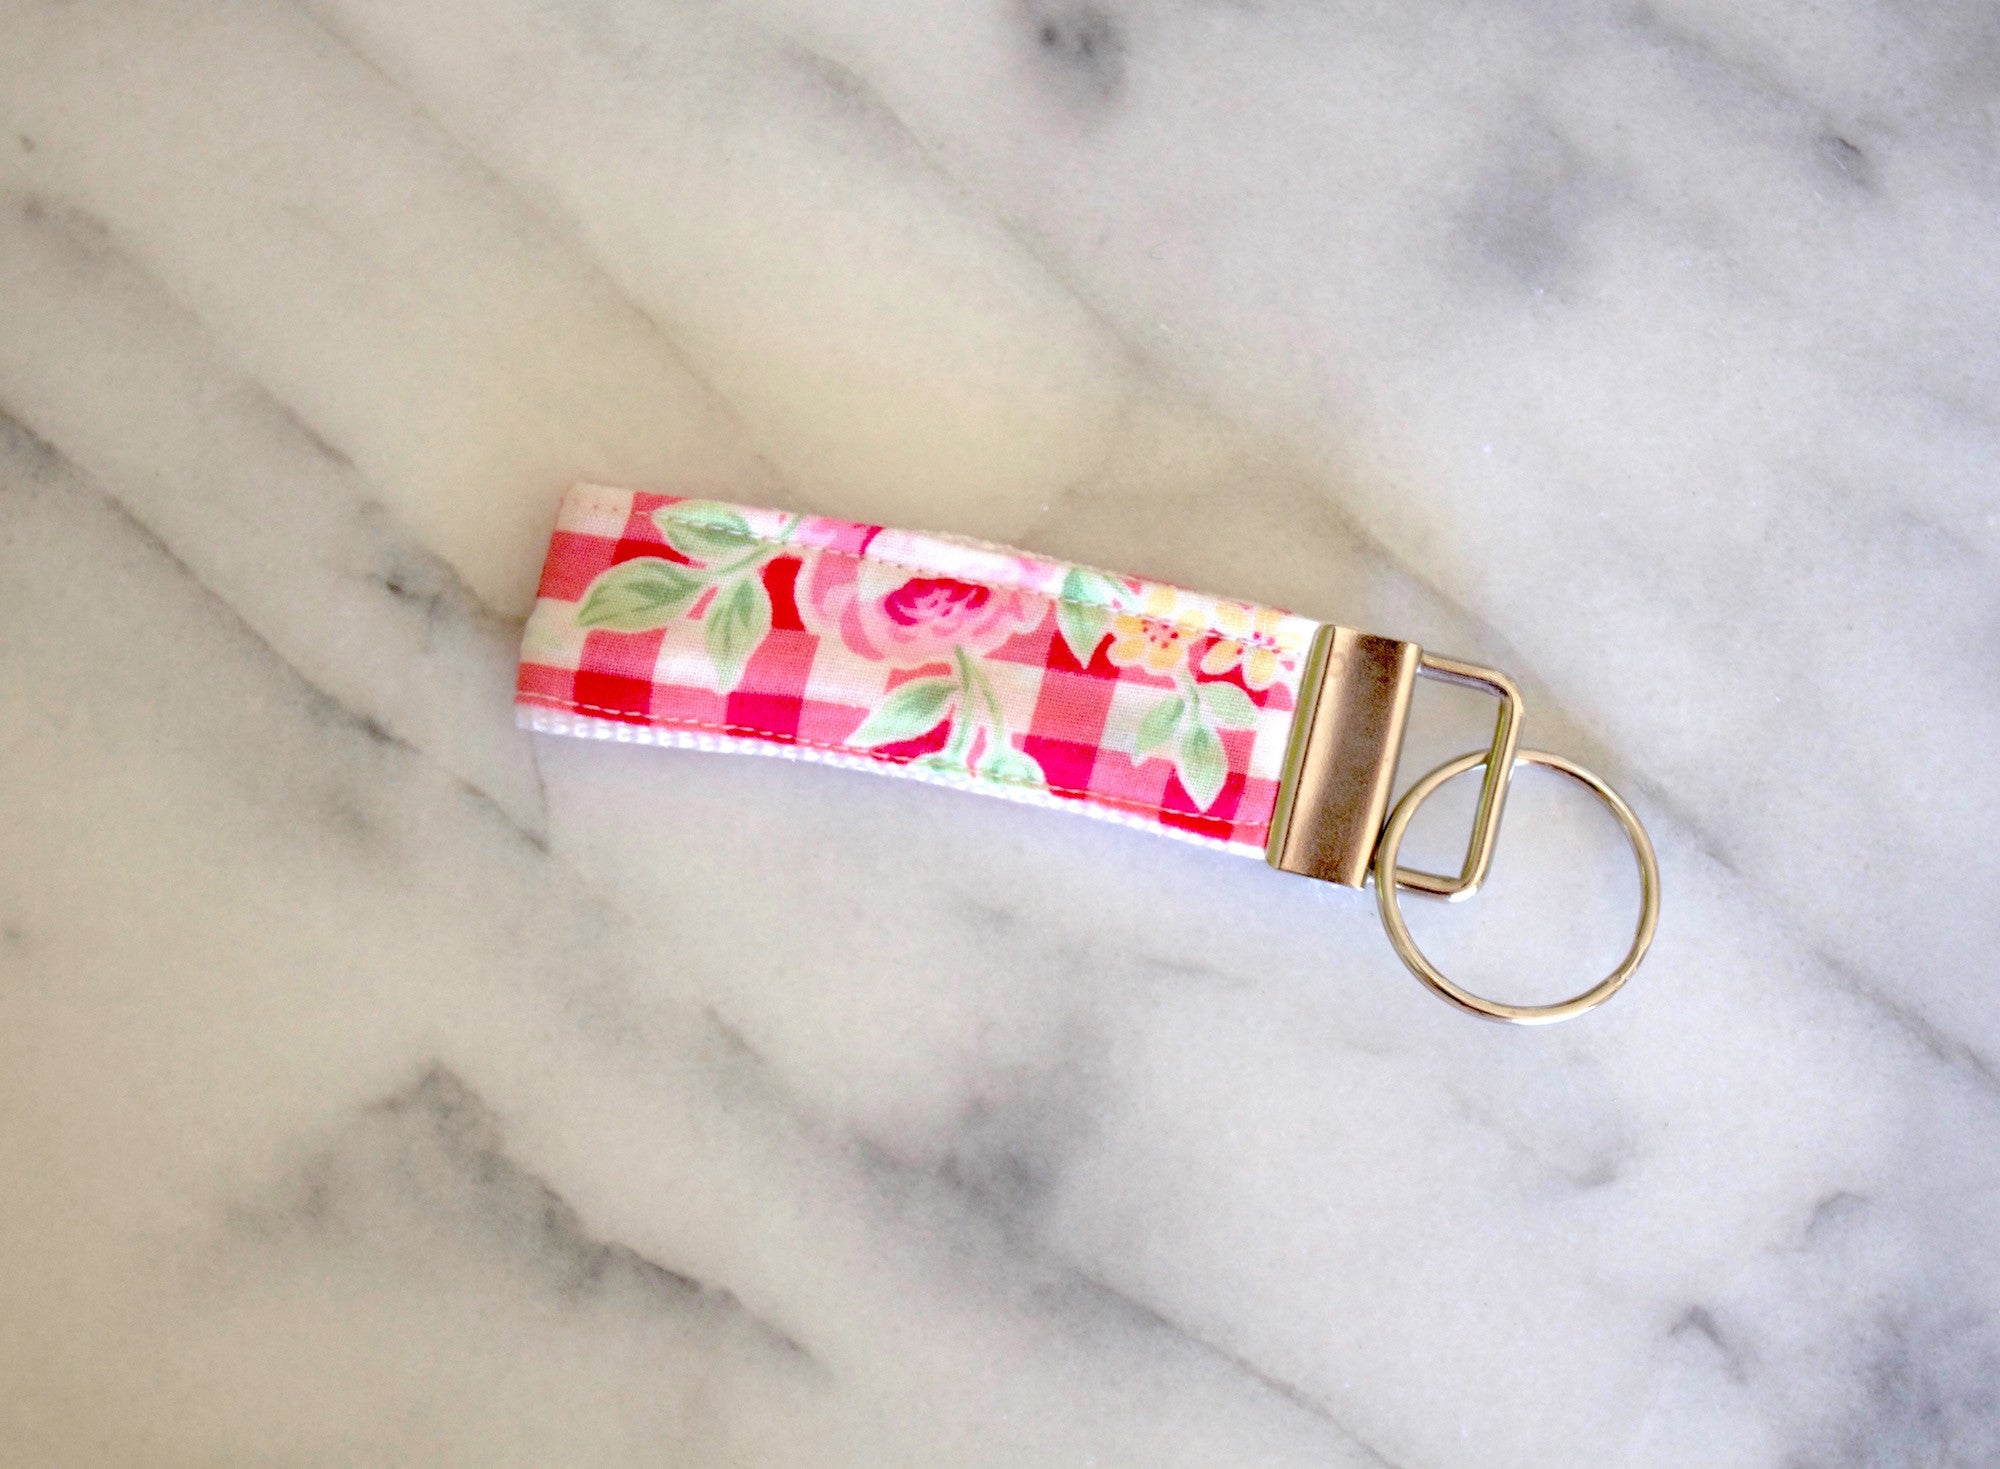 Gingham Rose Key Fob-The Blue Peony-Category_Key Fob,Color_Pink,Department_Personal Accessory